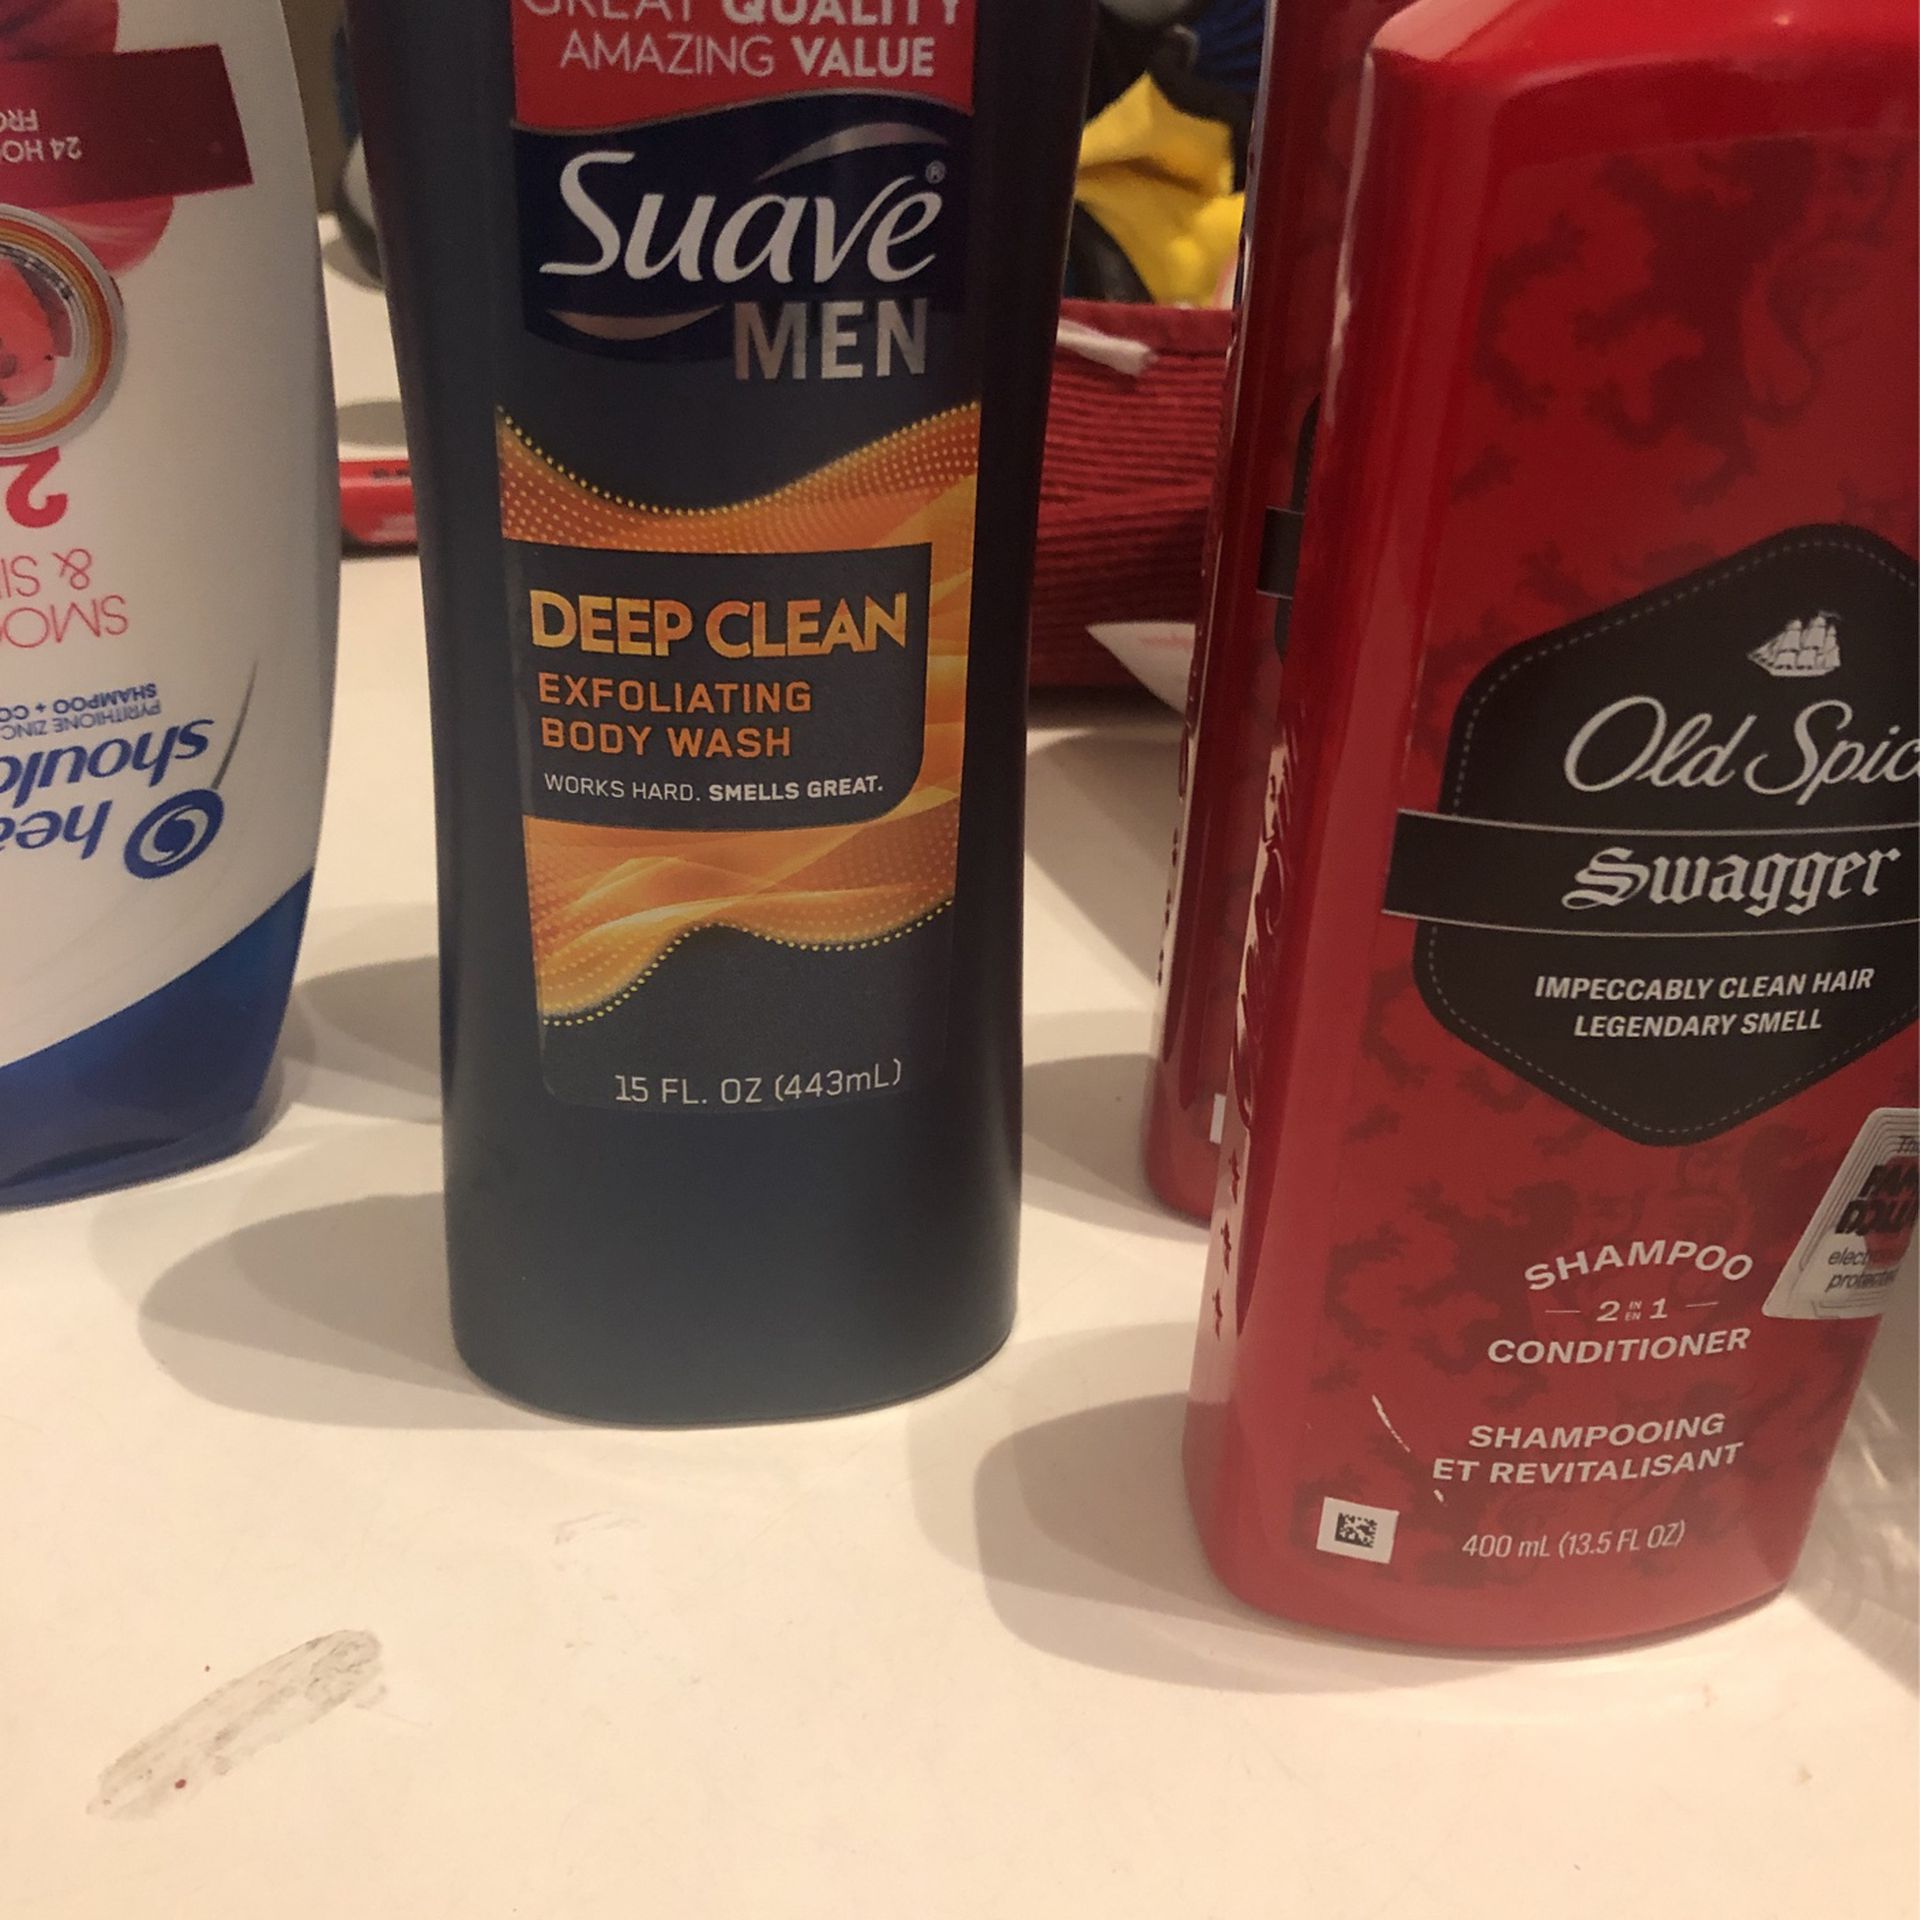 Variety of body wash and shampoo two In one